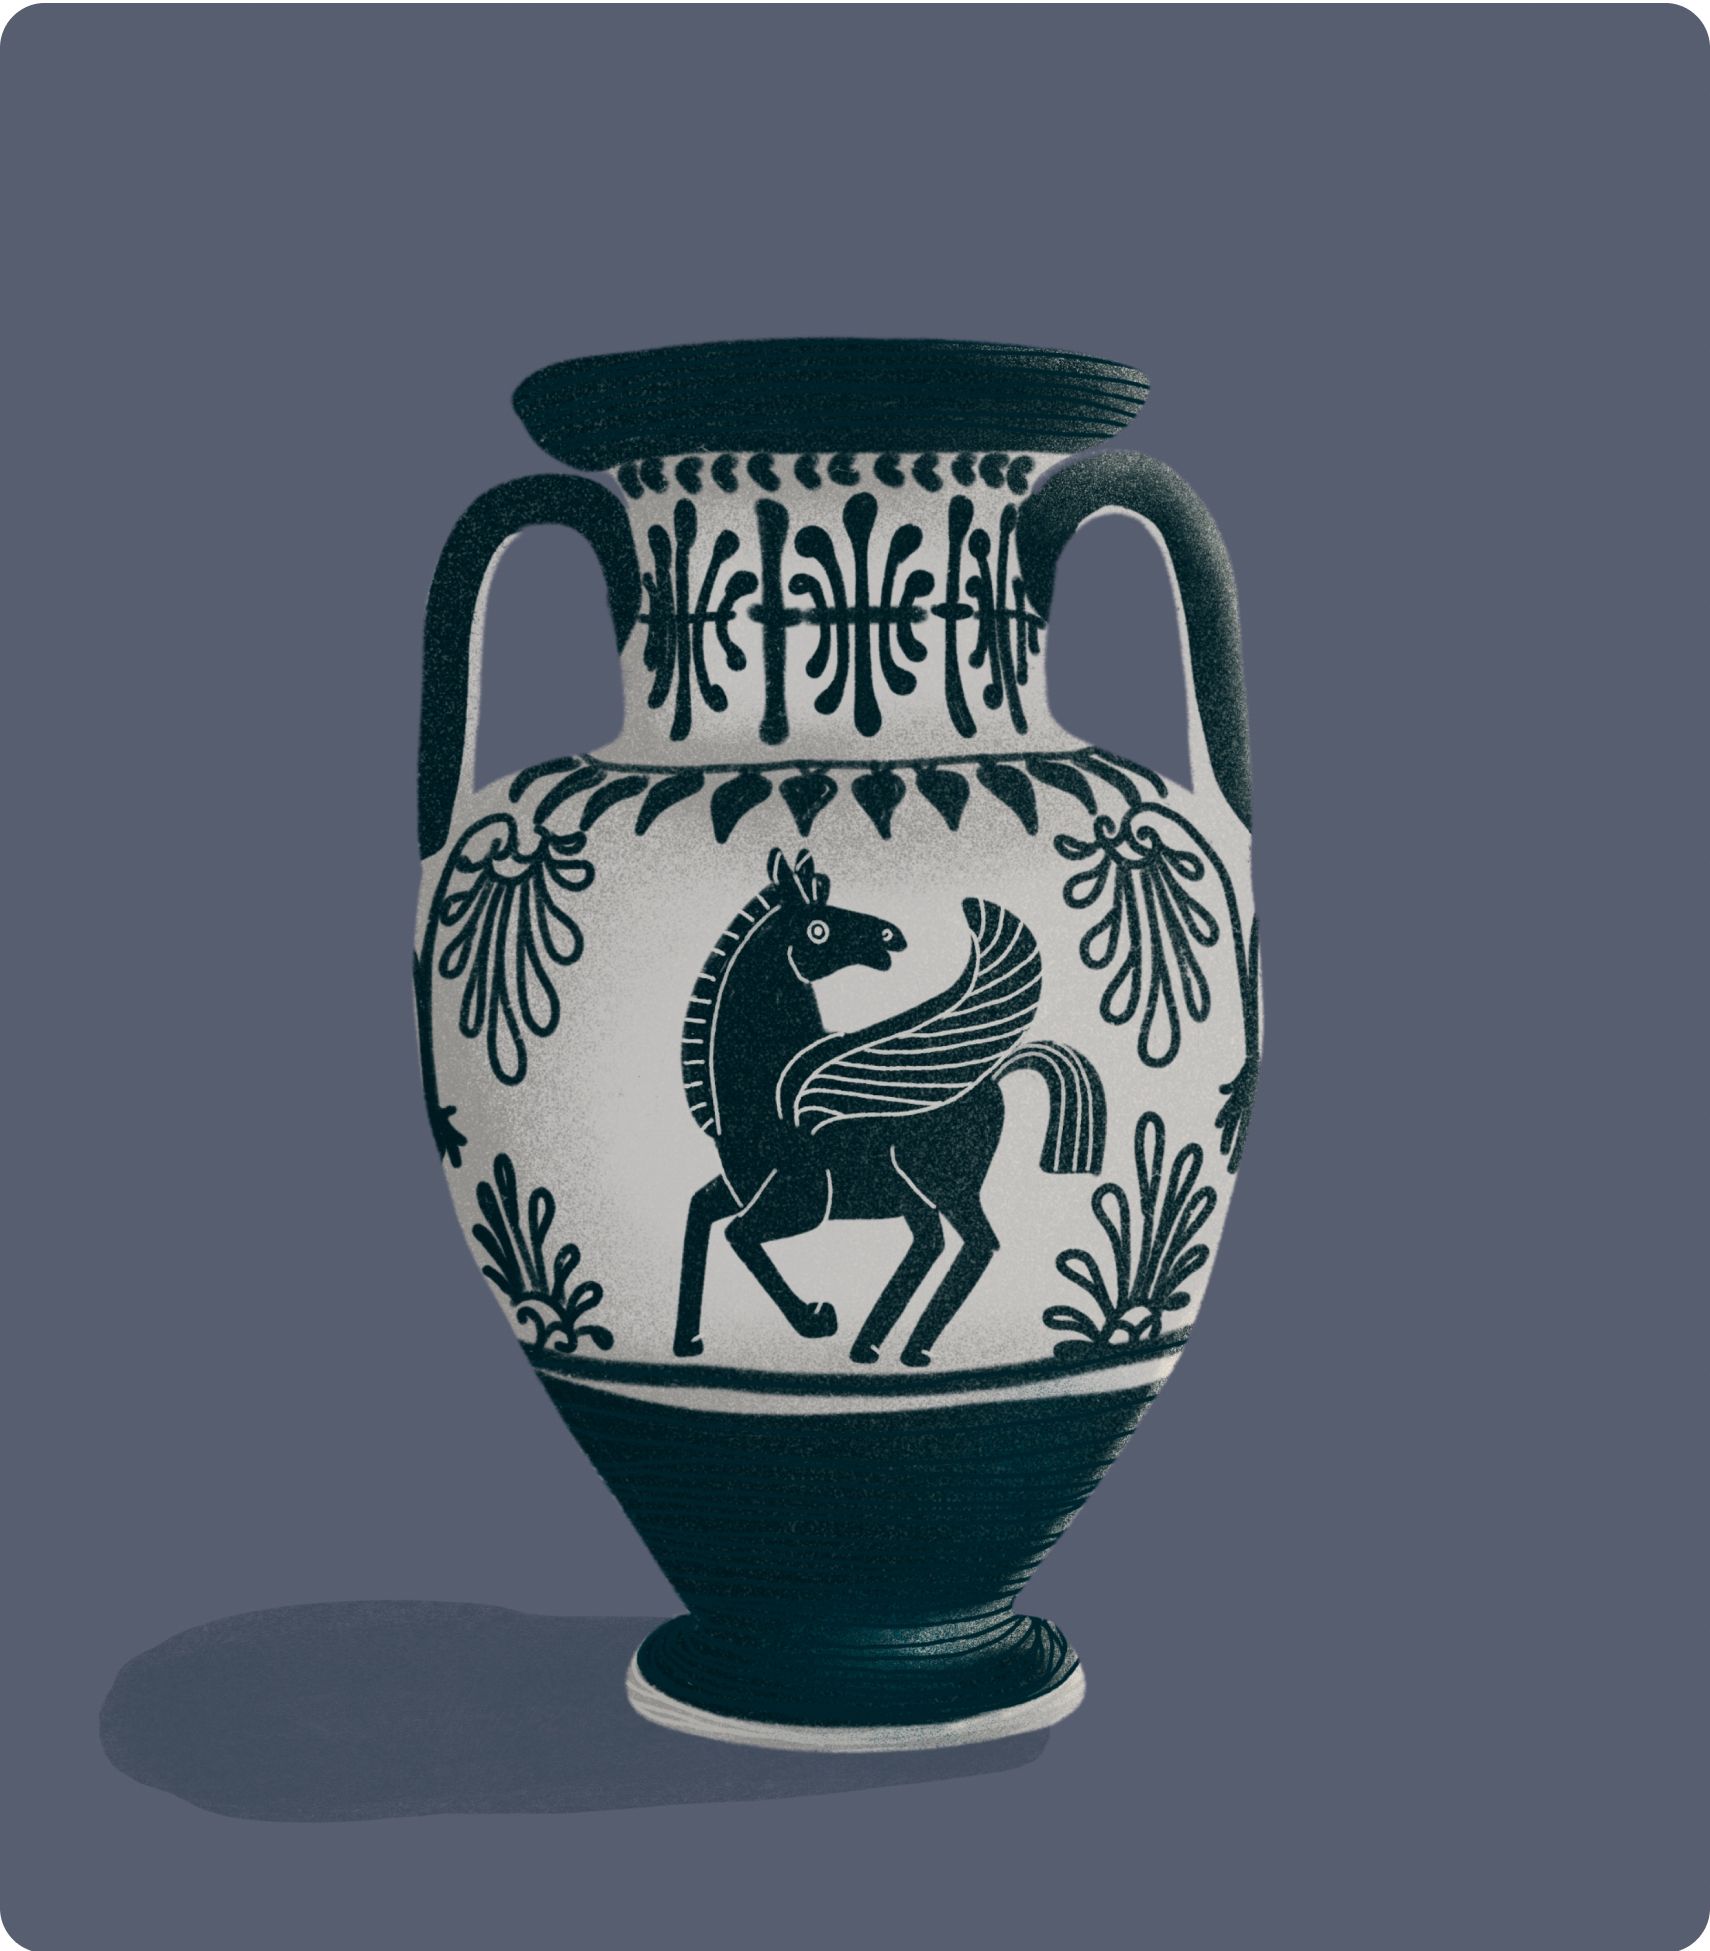 Illustration of an antique vase with a pegasus on the vase.